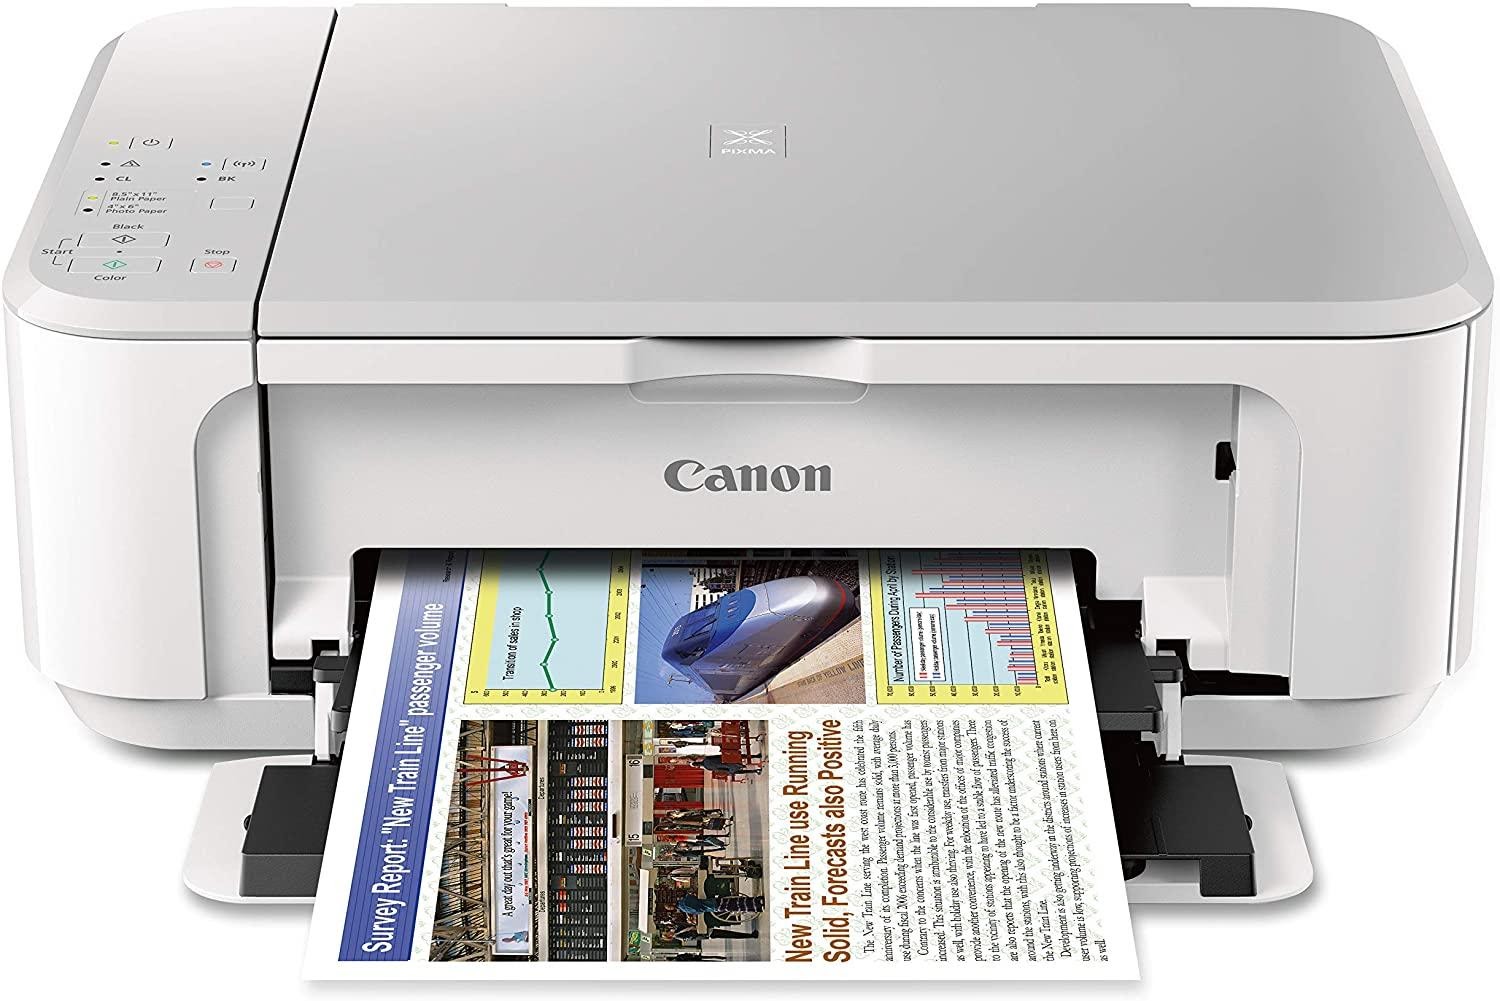 What major types of printers are common in offices?